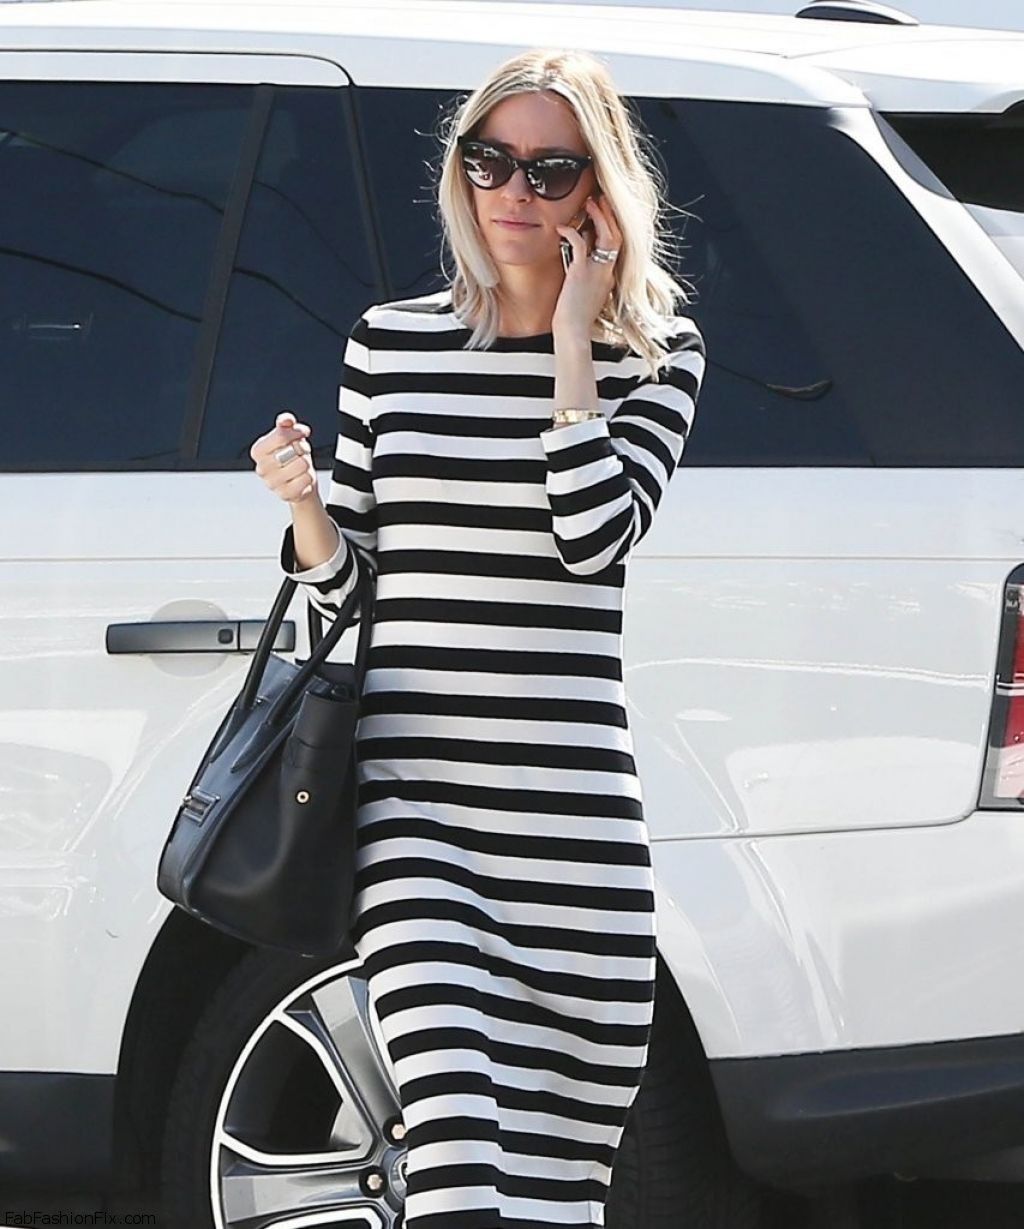 kristin-cavallari-in-striped-dress-out-in-west-hollywood-august-2014_17